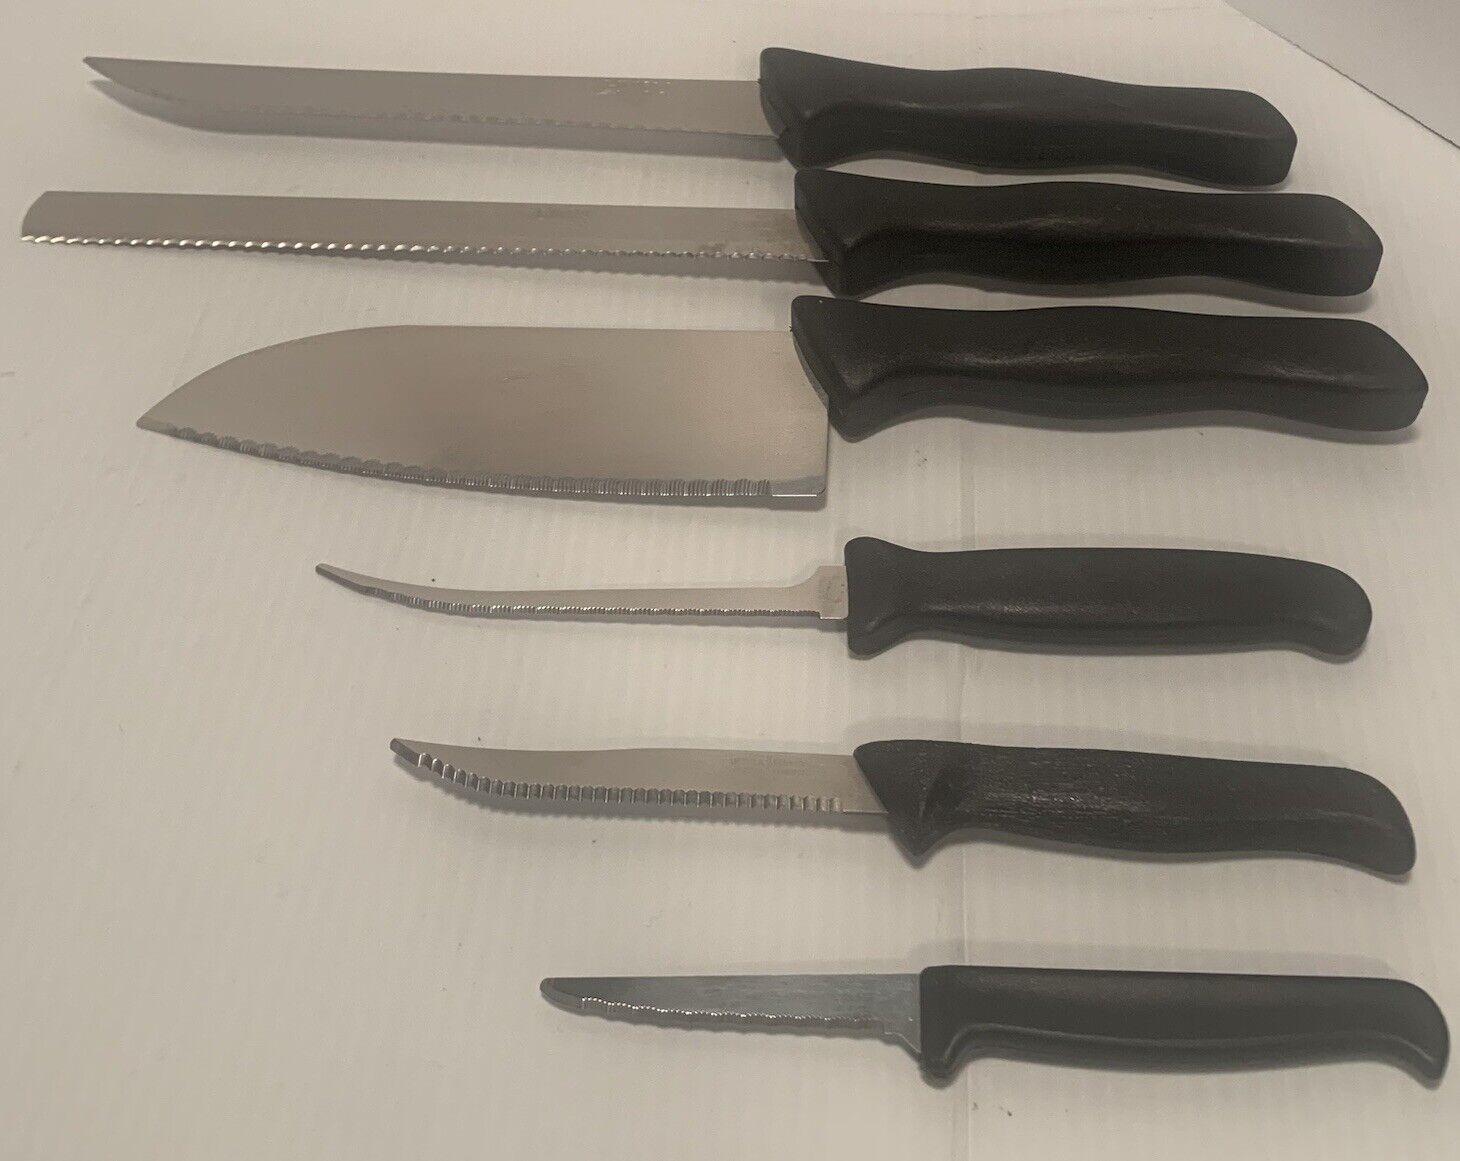 Ginsu Classic Stainless Steel Kitchen Knives: Set of 6 Pieces: See Photos